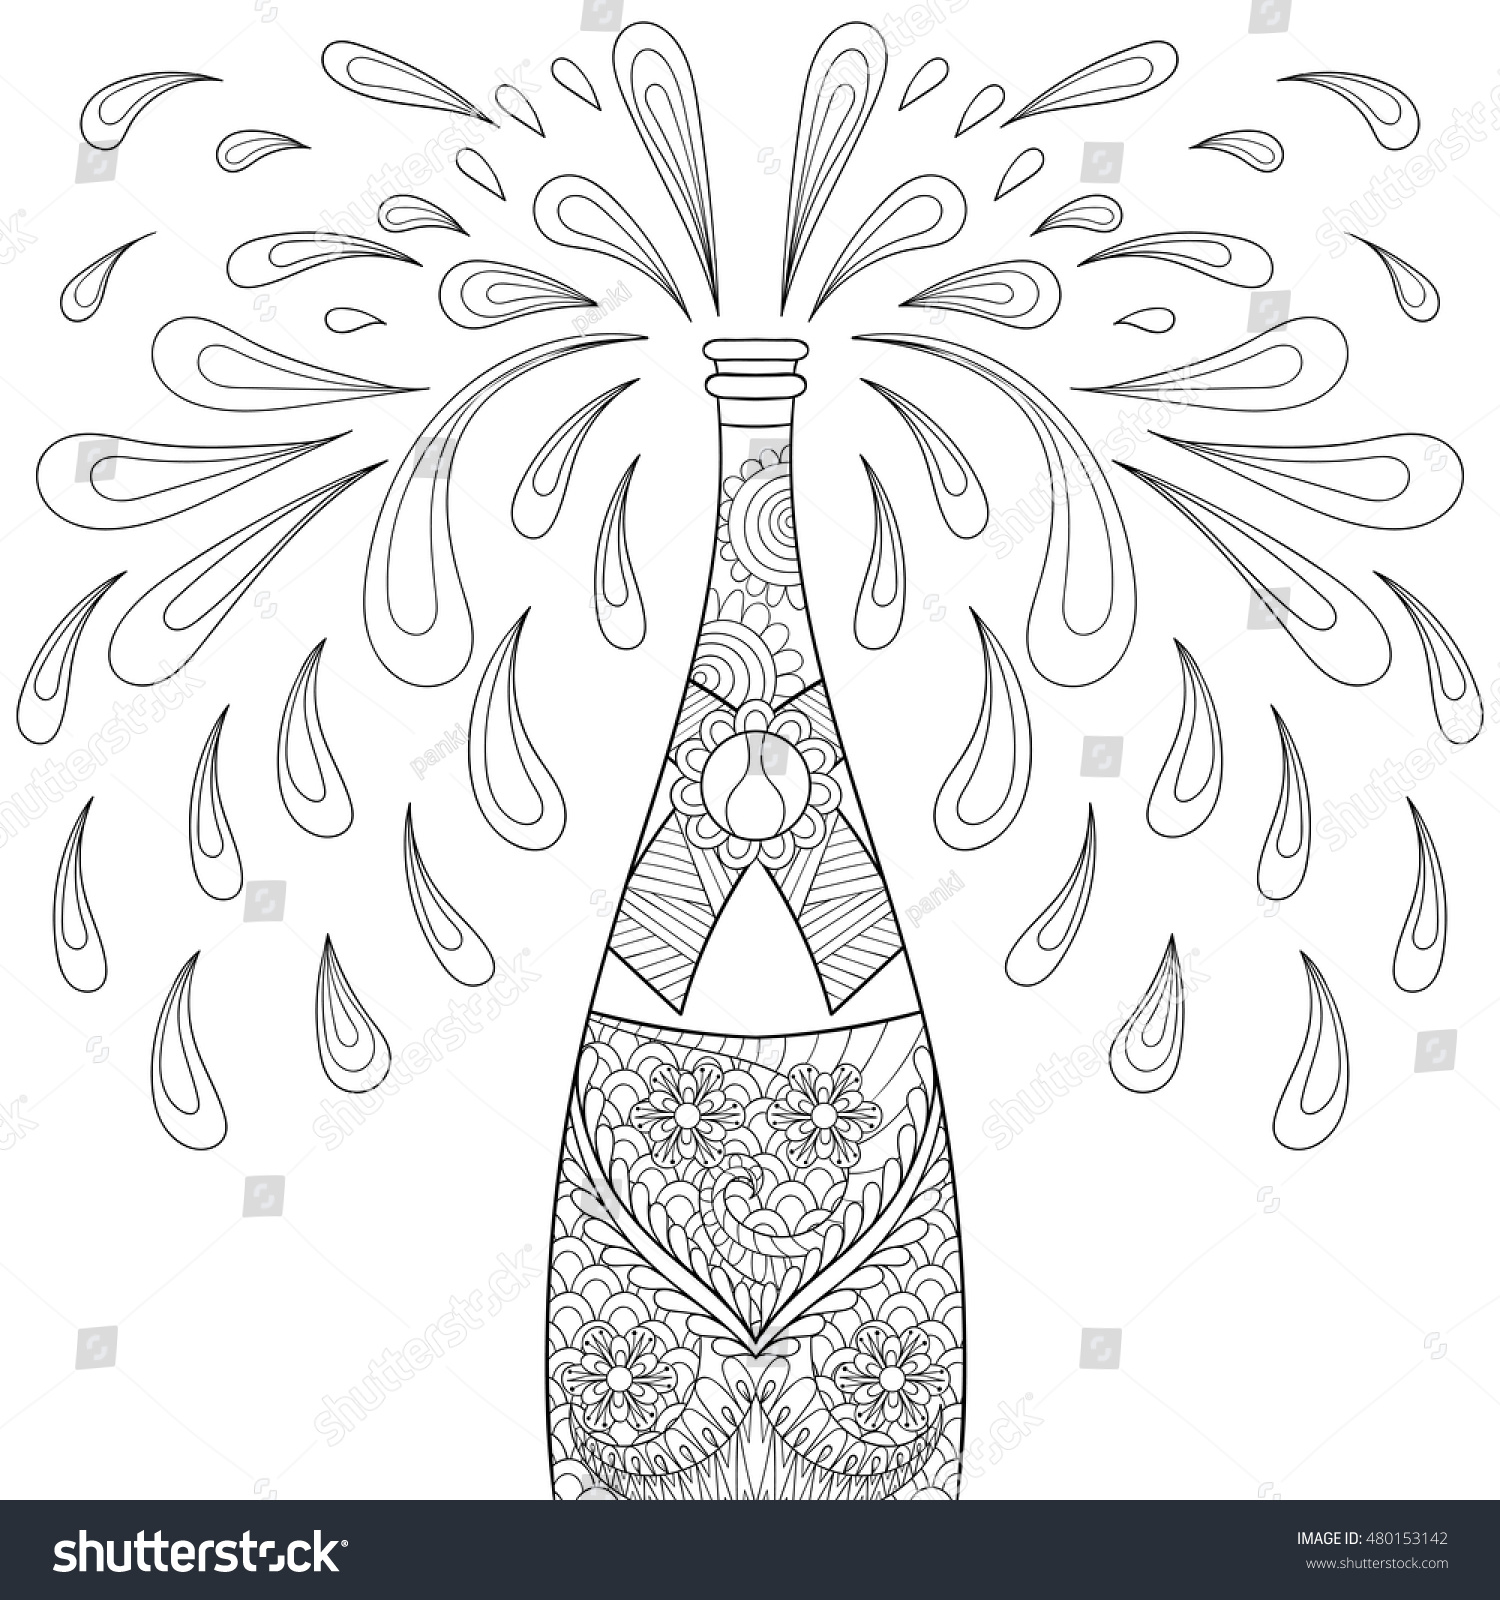 Champagne Explosion Bottle Zentangle Style Freehand Stock Vector ...